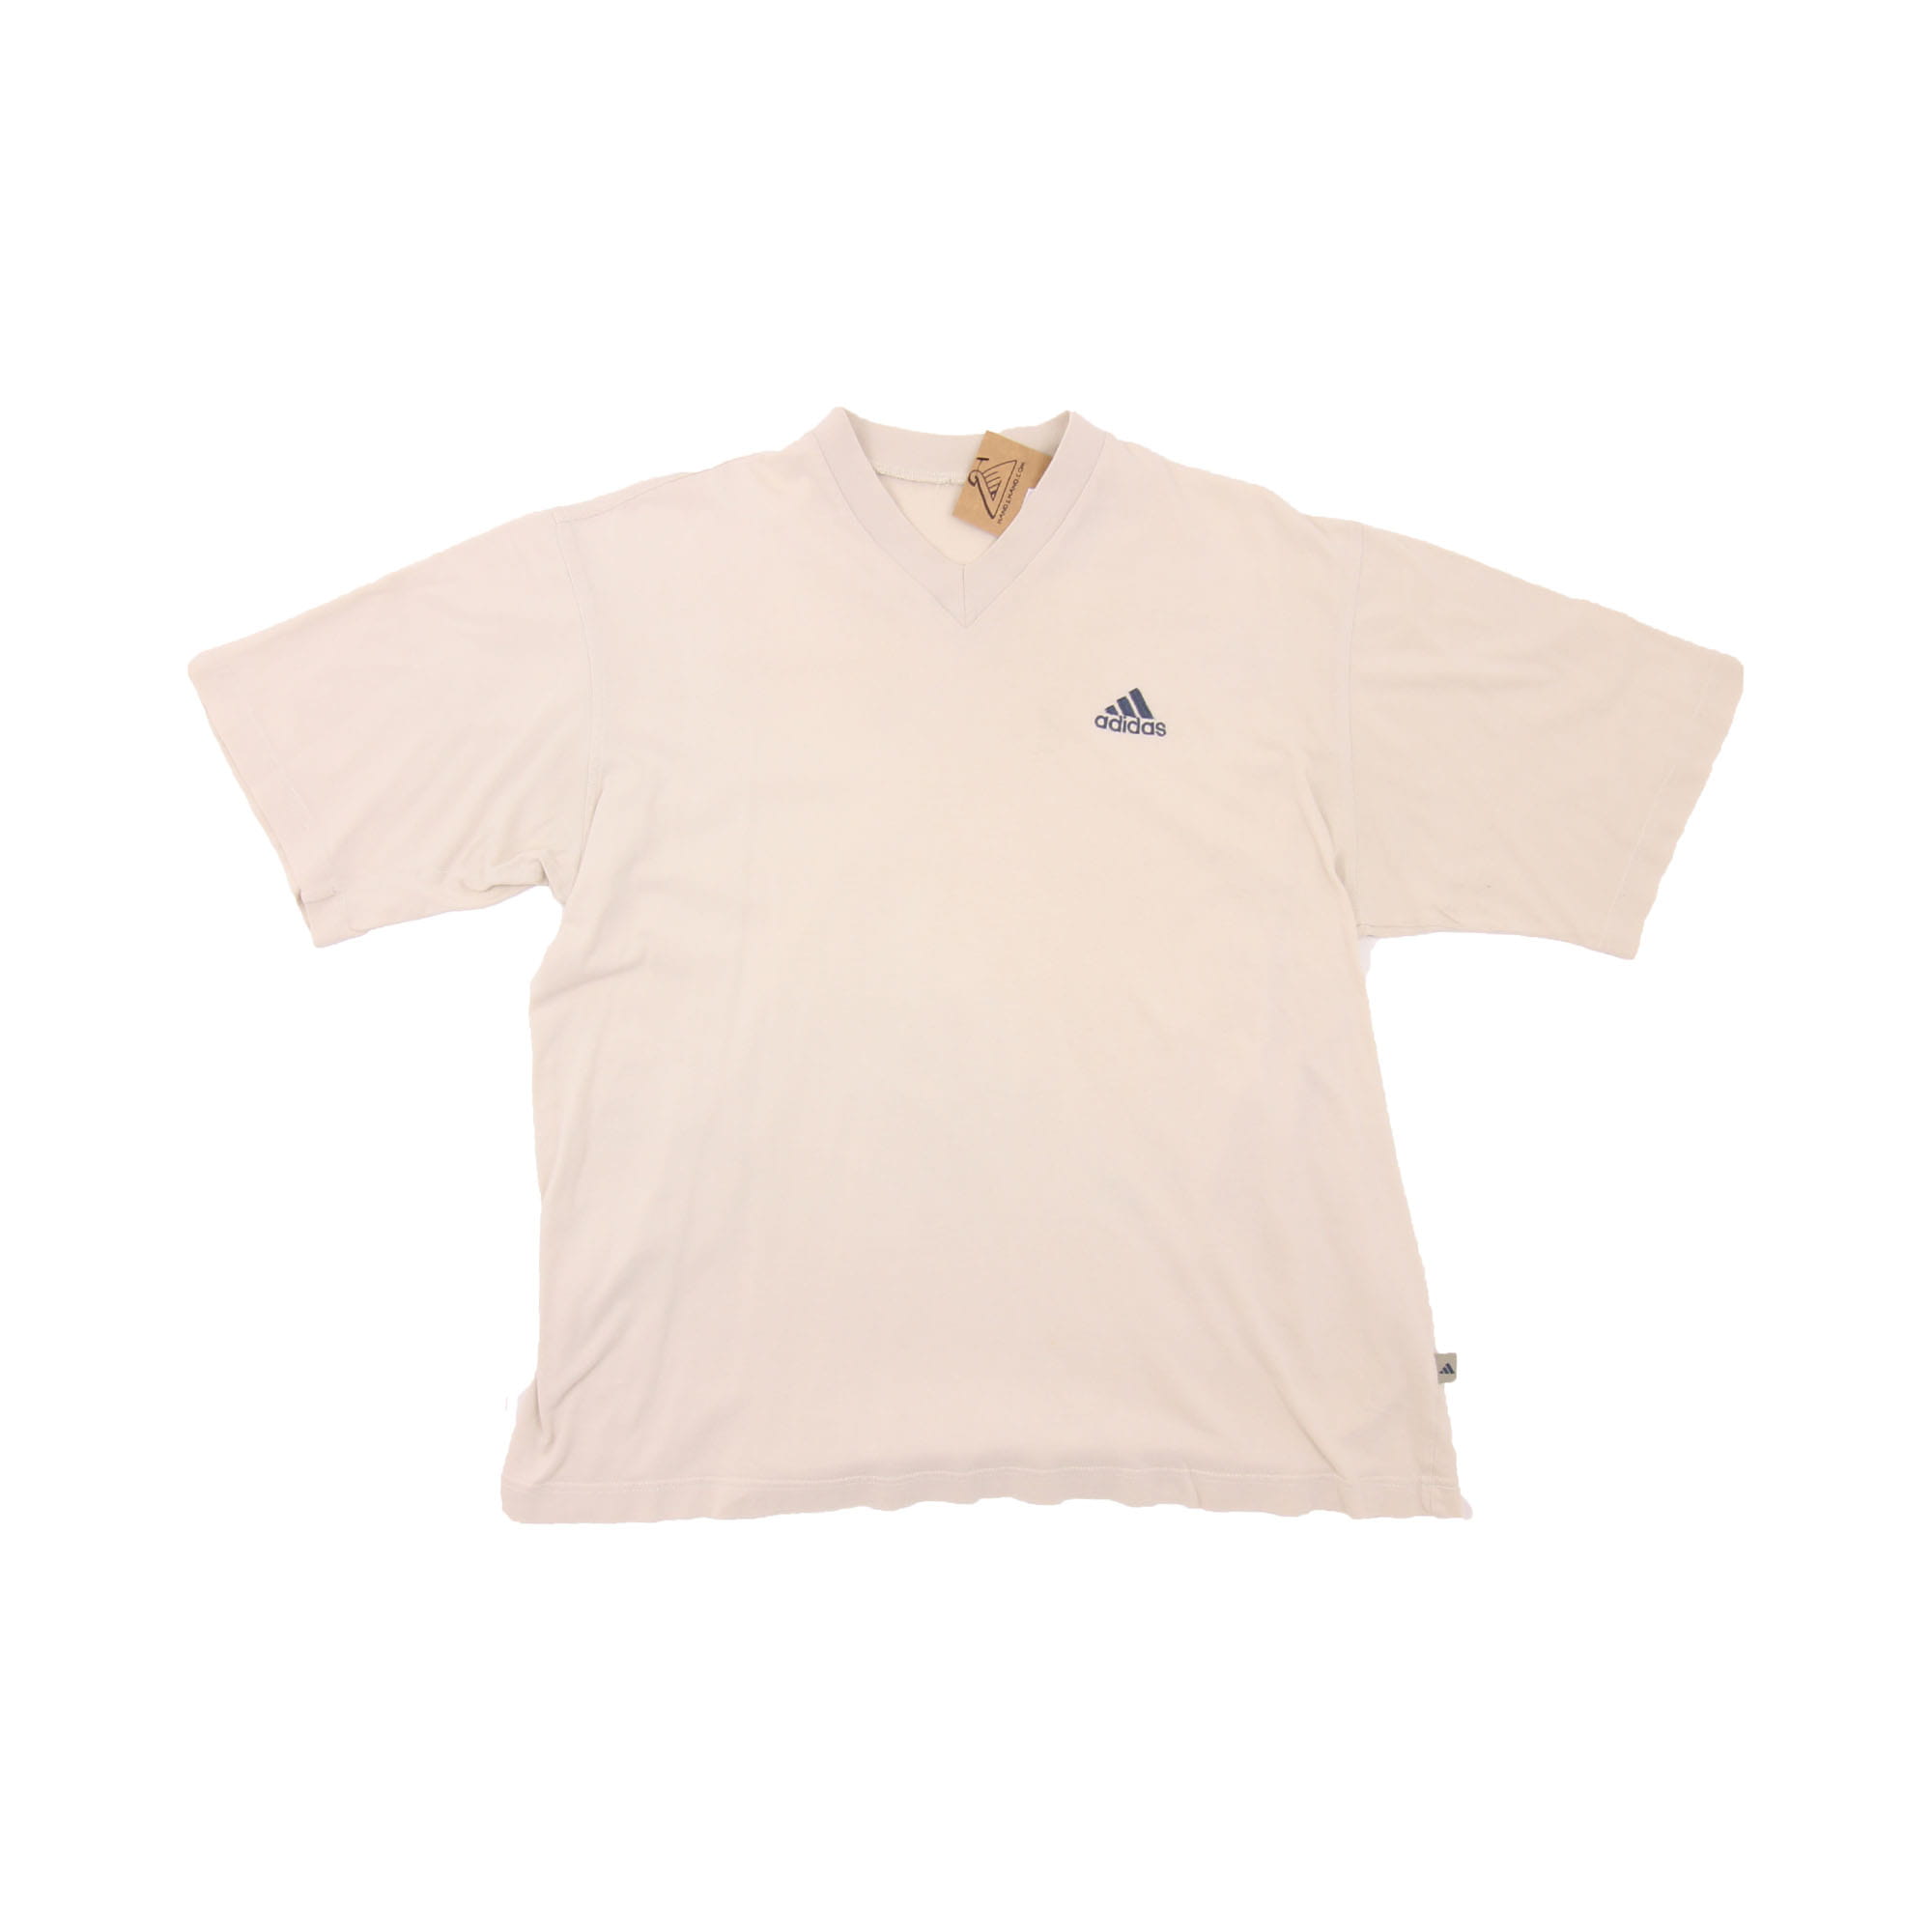 Adidas Embroidered Logo T-Shirt -  S/M